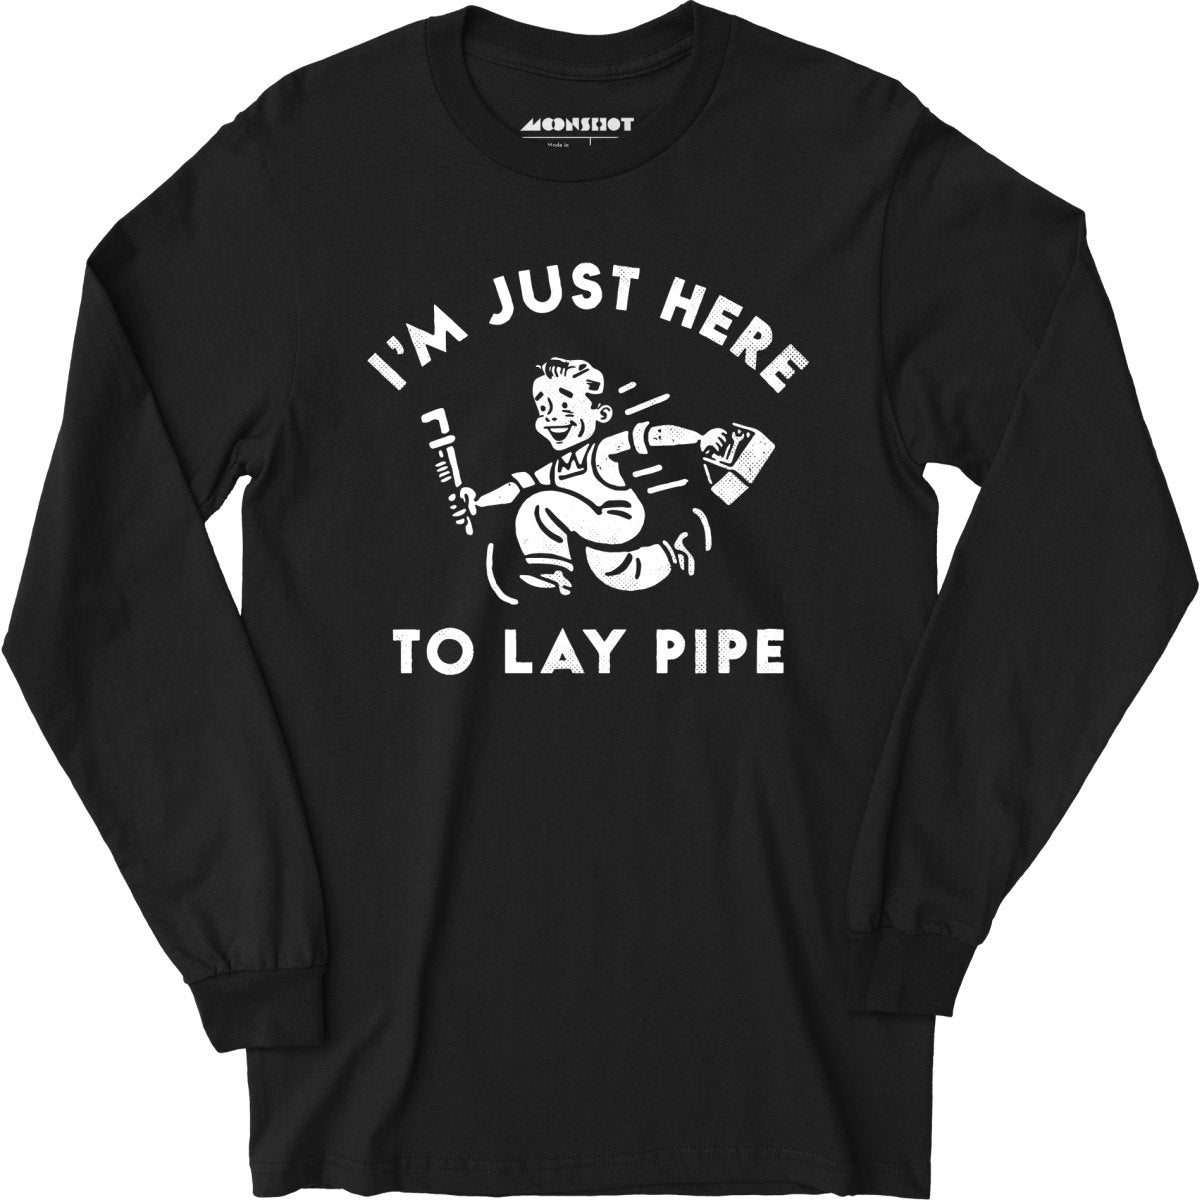 I'm Just Here to Lay Pipe - Long Sleeve T-Shirt